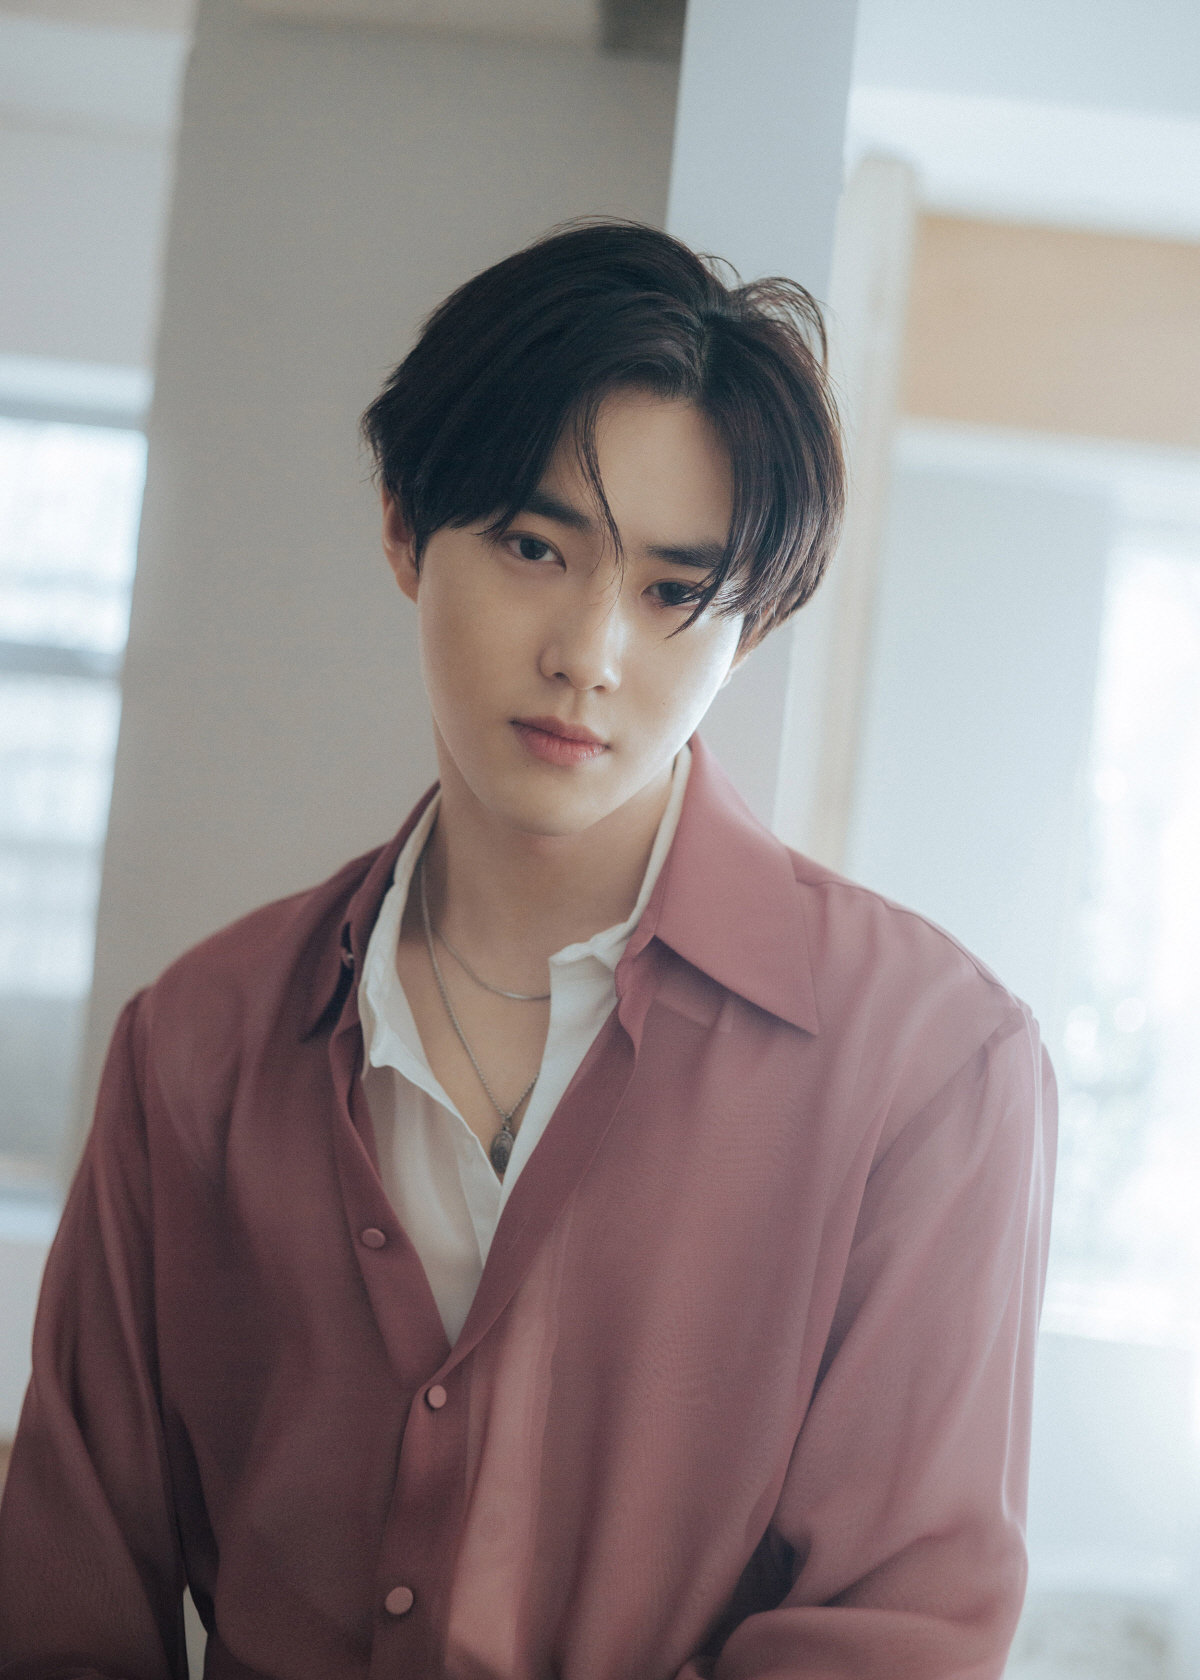 EXO Suho proved its limited global power at the same time as Solo debut.Suhos first mini album, Self-Portrait, released on Thursday, is on the iTunes top album chart: France, Finland, Sweden, United Arab Emirates, Saudi Arabia, Argentina, Brazil, Chile, Bahrain, Brunei, Bulgaria, Cambodia, Colombia, Costa Rica, Czech Republic, Dominican Republic, Egypt, Estonia, Greece, Hong Kong, Indonesia, It ranked first in 50 regions around the world, including Israel, Japan, Jordan, Kazakhstan, Taiwan, Laos, Malaysia, Mexico, Mongolia, New Zealand, Nigeria, Bolivia, Norway, Oman, Panama, Peru, Philippines, Poland, Qatar, Romania, Russia, Belarus, Singapore, Sri Lanka, Thailand, Turkey, Ukraine and Vietnam.In addition, this album ranked first in various music charts such as Hanter chart, Shinnara record, Kyobo Bookstore, Yes24, Aladdin, as well as the digital album sales chart in Chinas largest music site QQ music, Cougu Music and Couer Music. The title song Love, Hazard (Lets Love) It confirmed Suhos explosive popularity by climbing to the top of the major music charts in real time.Suhos first mini album, Self-Portrait, includes the title song Love, Lets Love in the modern rock genre, as well as O2 (Otu), Made In You (Made in You), Starry Night, Self-Portrait,  A total of six songs in a lyrical atmosphere, including Your Turn (For You Now), are being received and received a good response.Suho will appear on MBC FM4U Noons Hope Song Kim Shin Young which is broadcasted at 12:00 pm on the 31st.